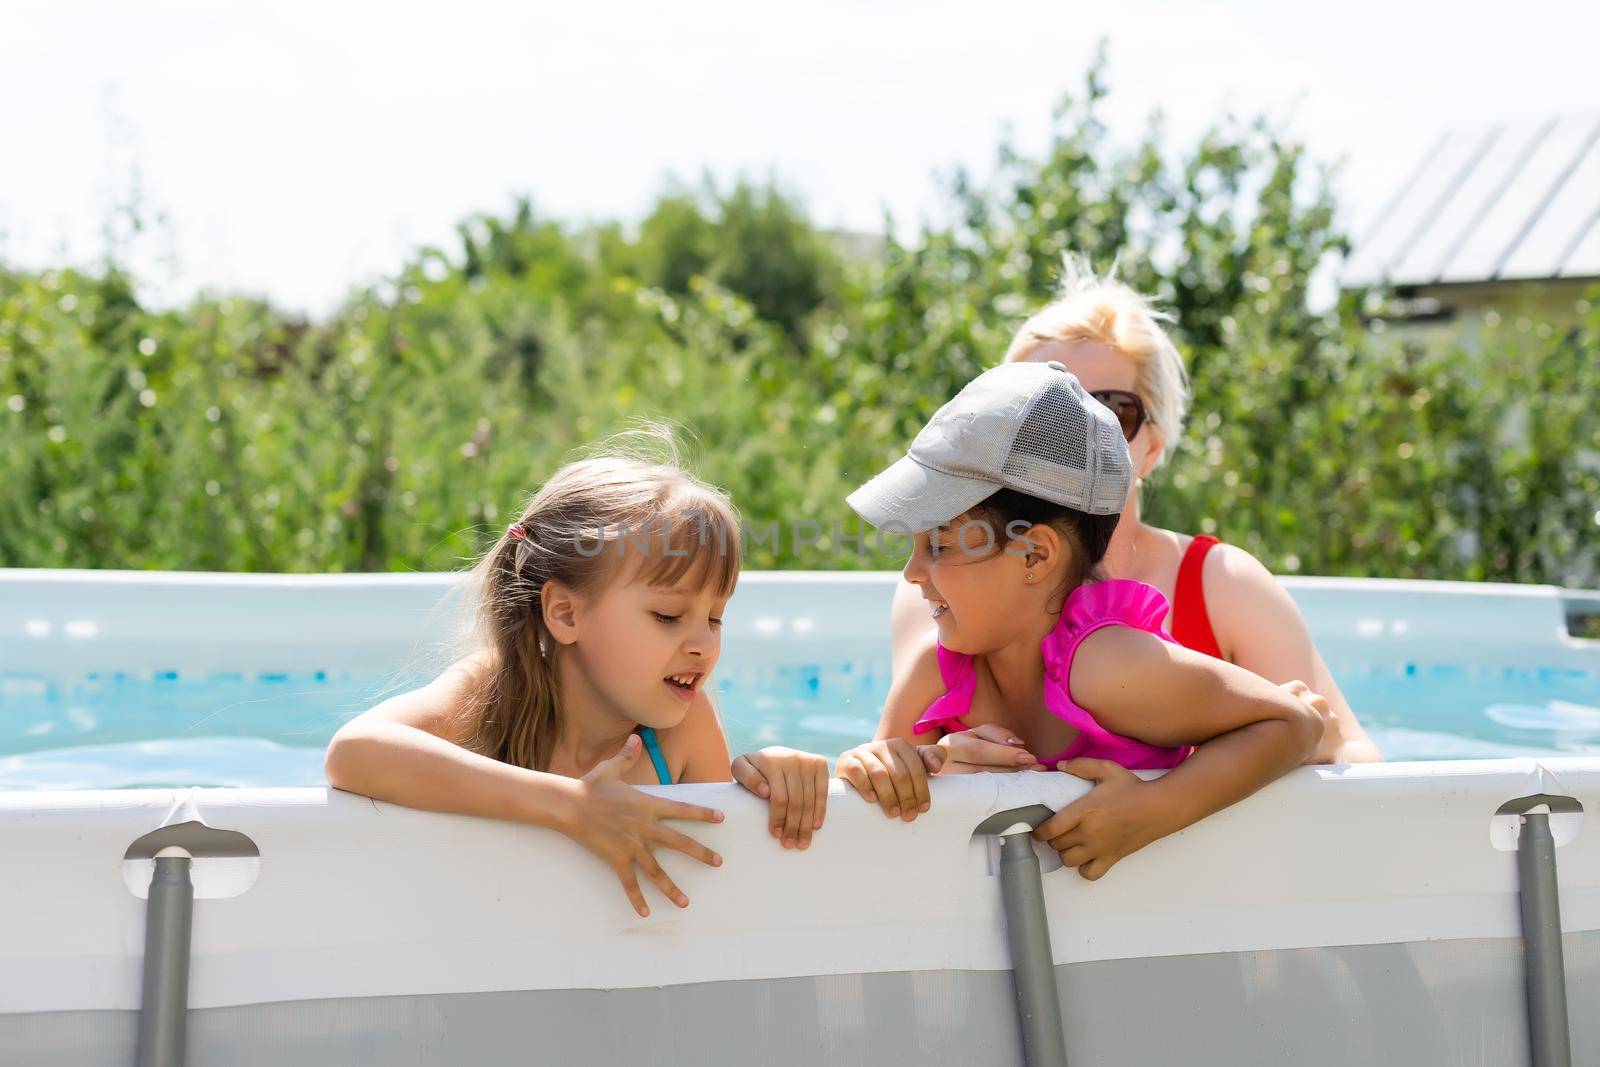 Mother and two daughters playing in pool water.Woman and two girls have fun in home pool splashing water and smiling